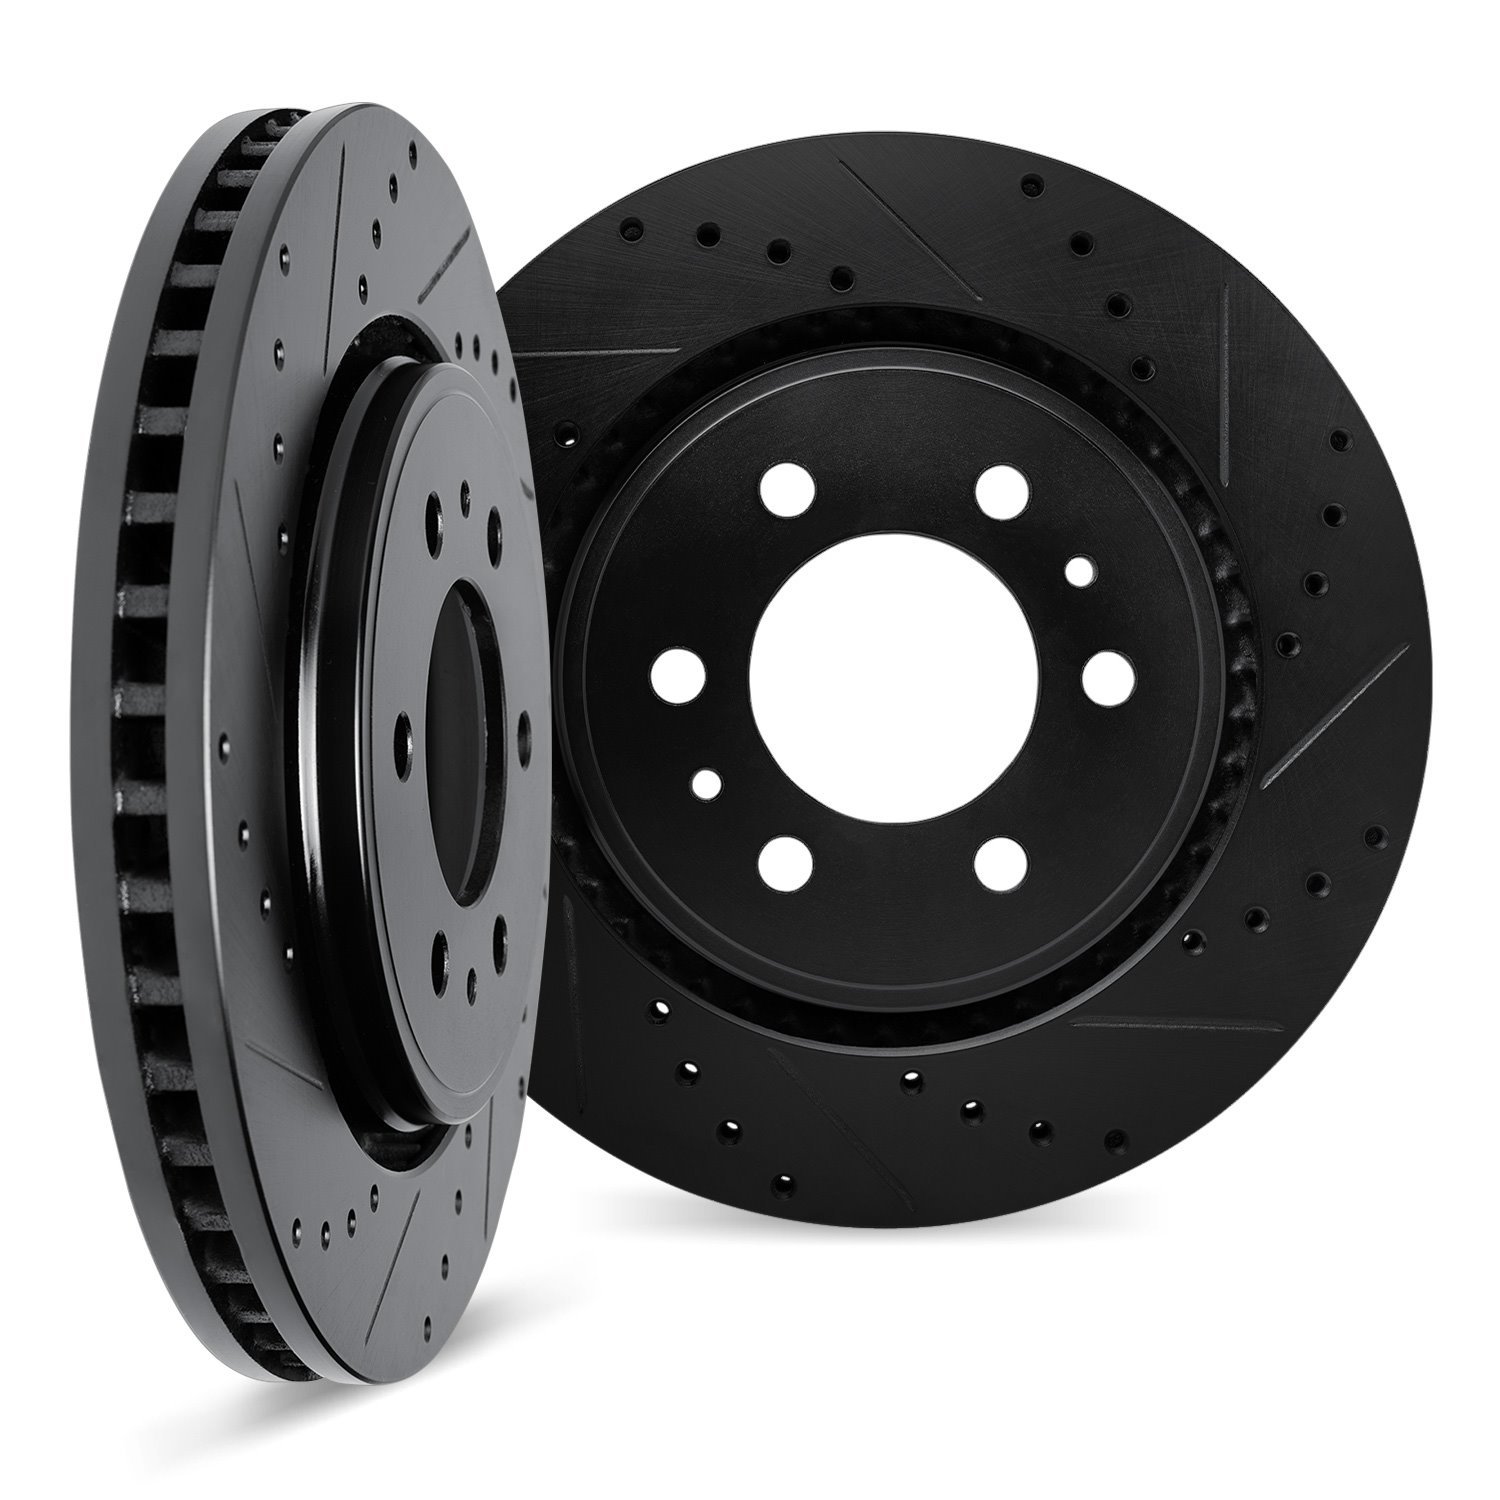 8002-76092 Drilled/Slotted Brake Rotors [Black], 1993-1998 Lexus/Toyota/Scion, Position: Front